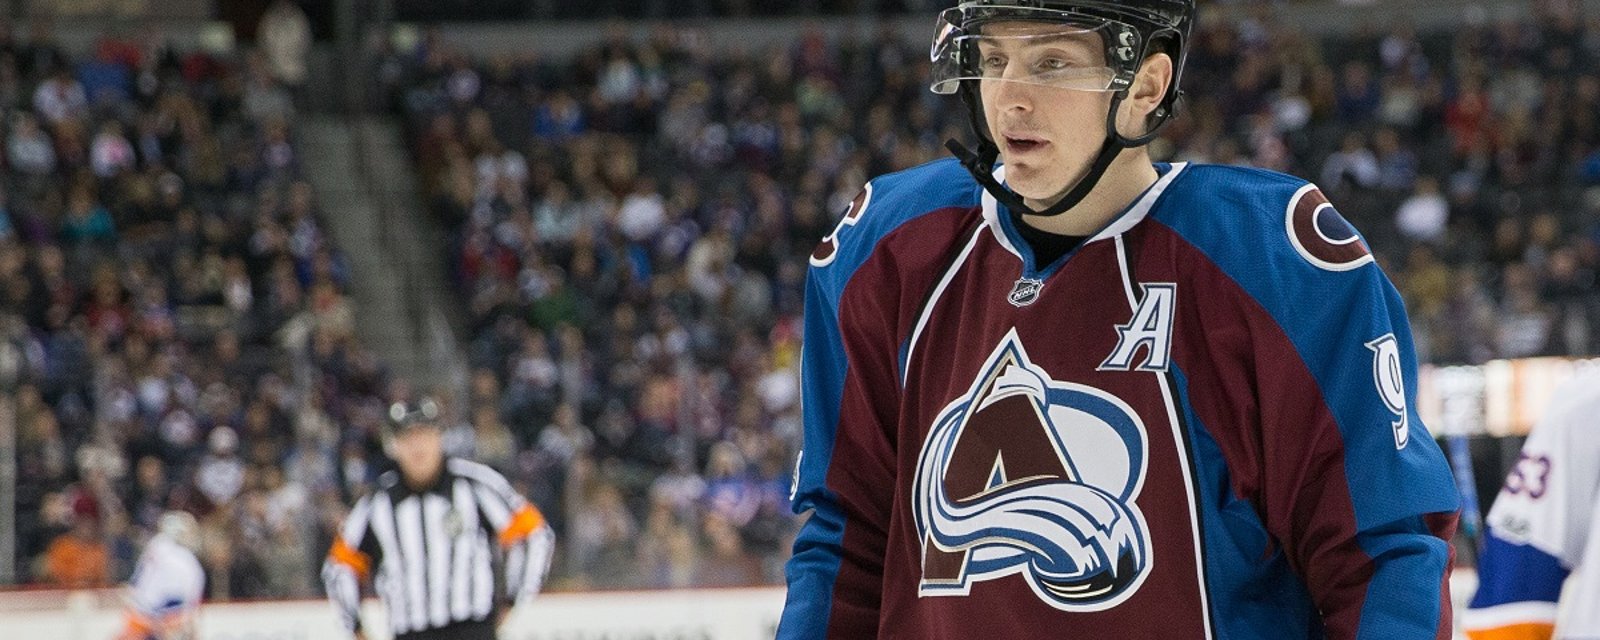 Breaking: Insider reveals the real reason Matt Duchene wanted to be traded.